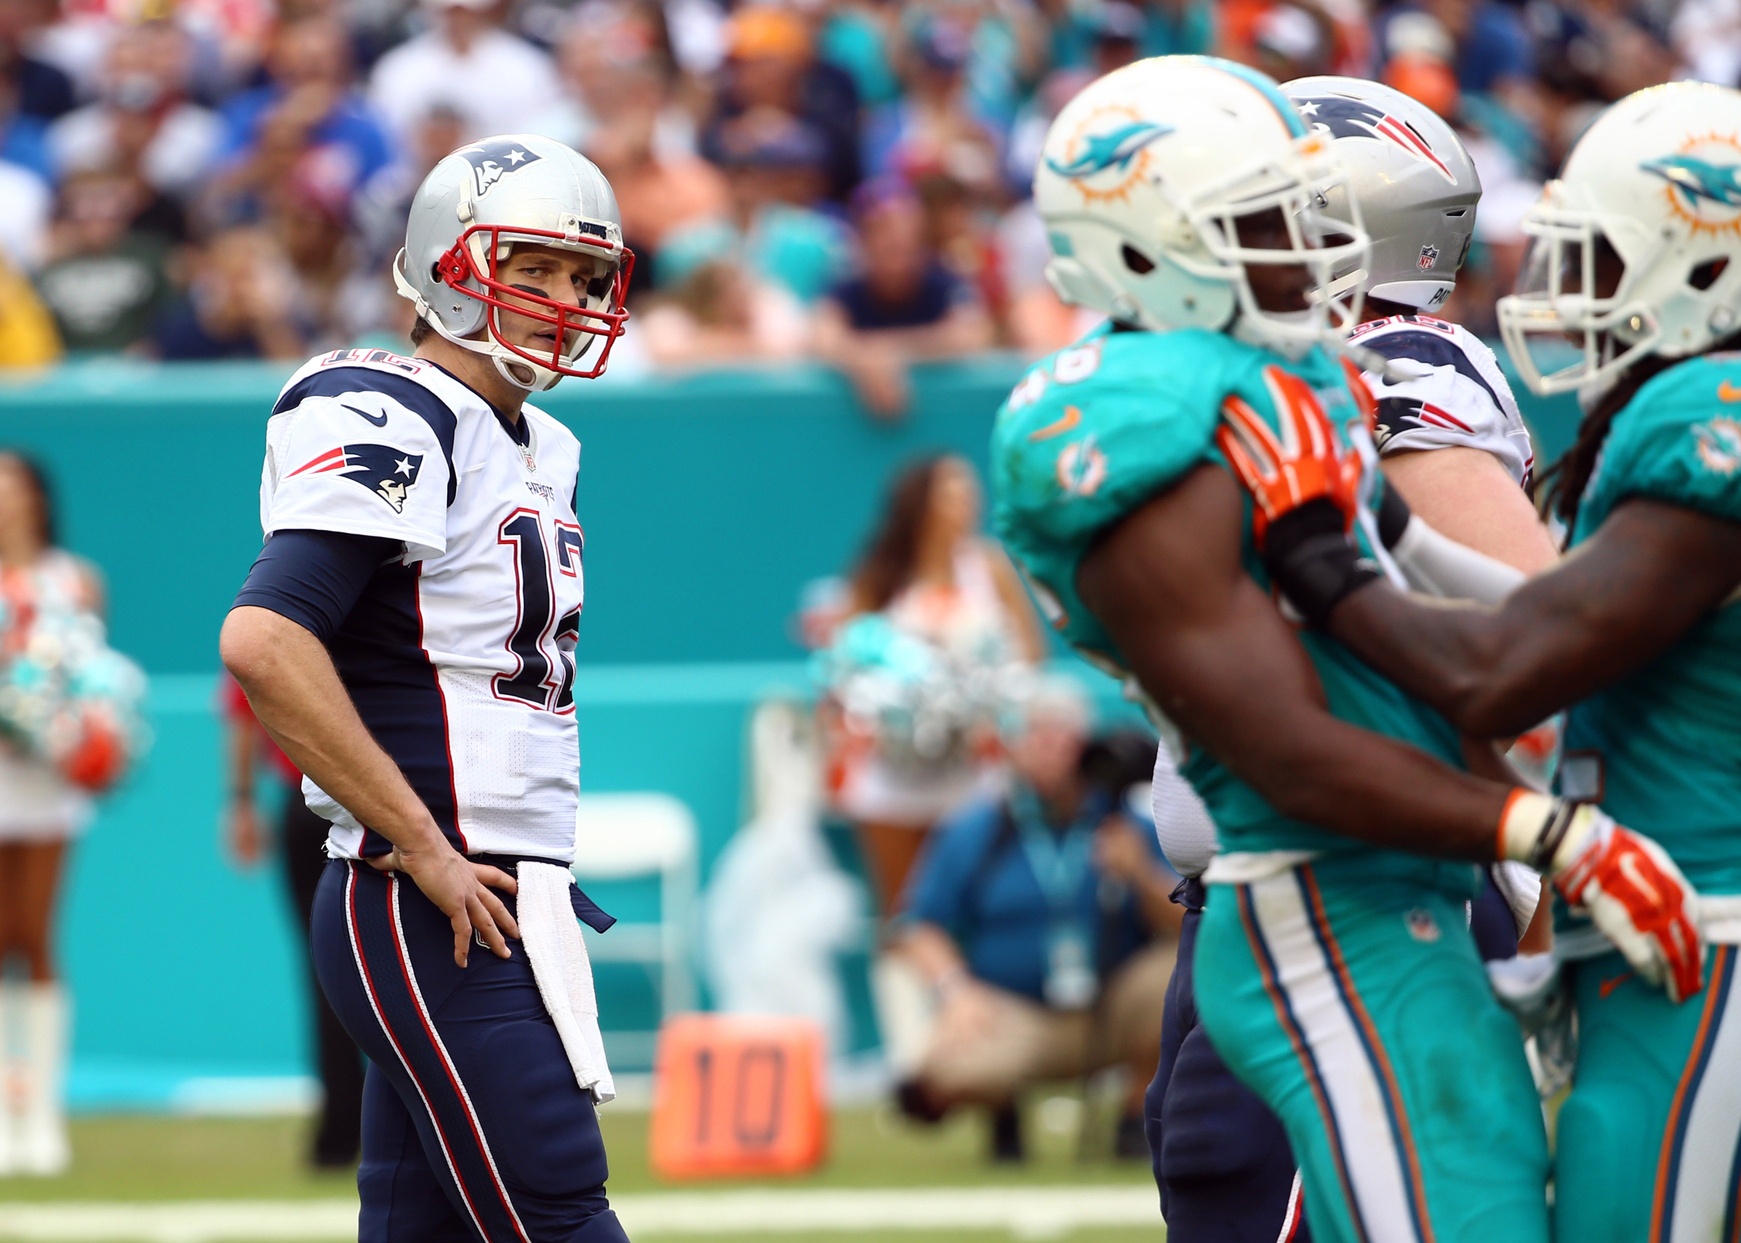 Jan 3, 2016; Miami Gardens, FL, USA; New England Patriots quarterback Tom Brady (12) looks over at members of the Miami Dolphins during the second half at Sun Life Stadium. The Dolphins won 20-10. Mandatory Credit: Steve Mitchell-USA TODAY Sports